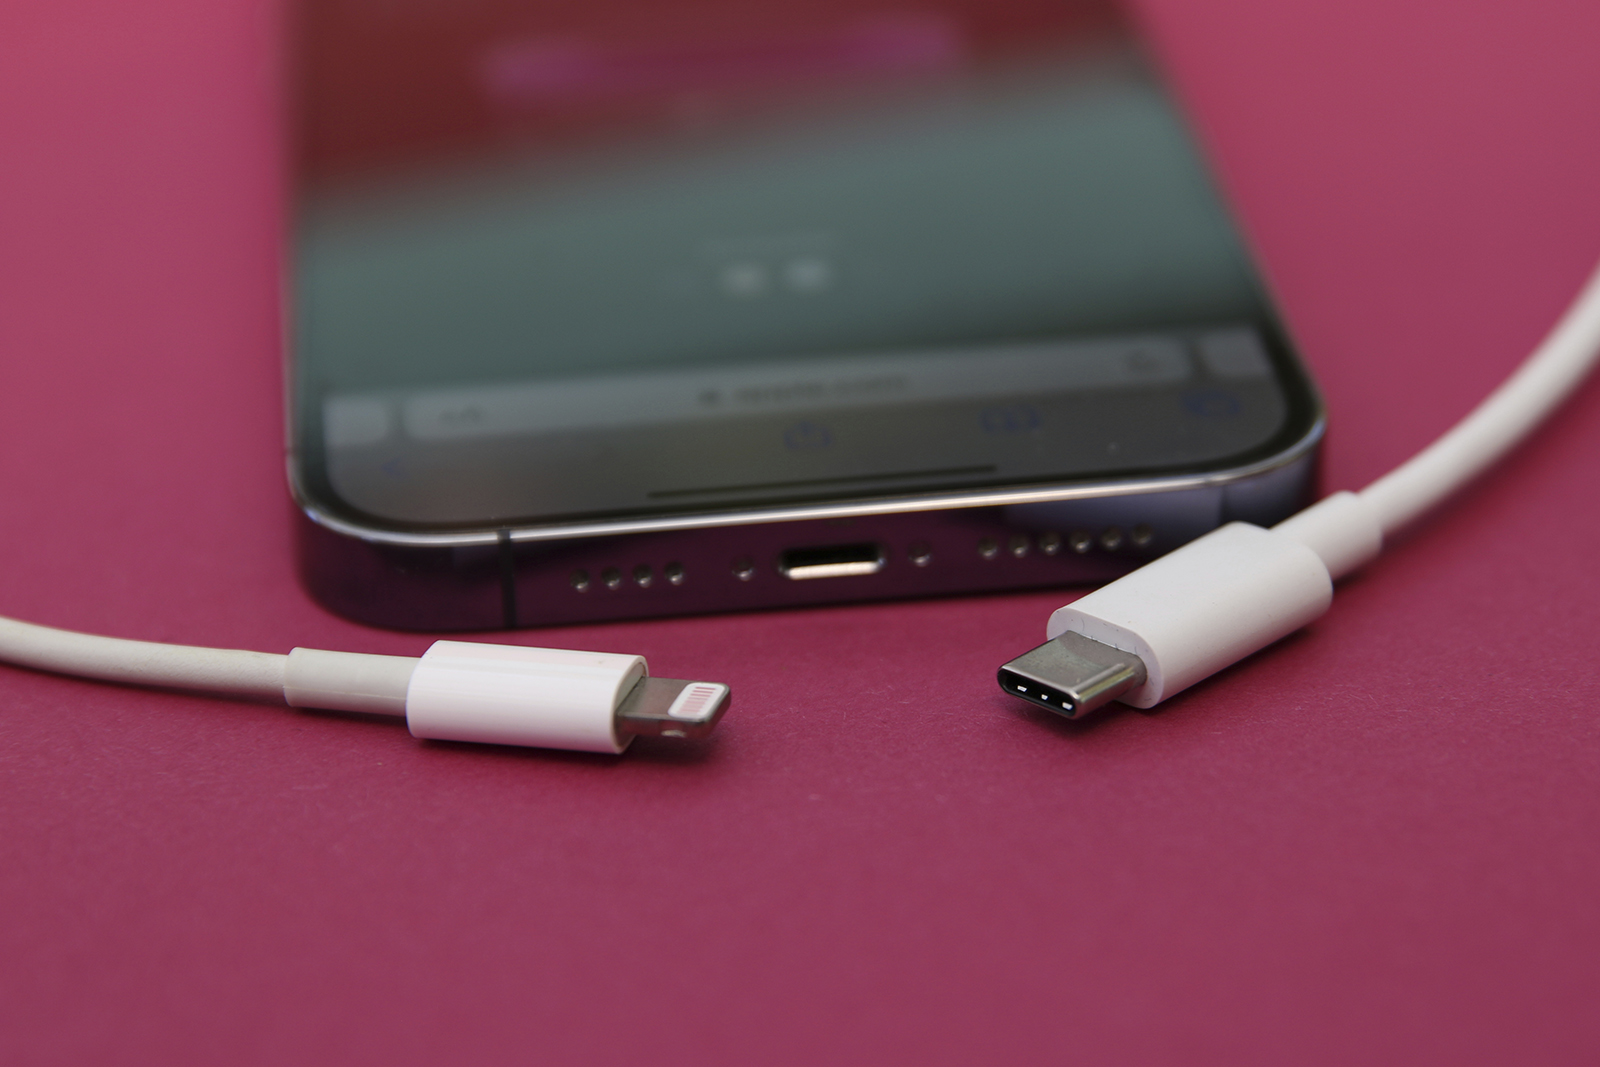 25) What does the USB-C charger mean for iPhone users?